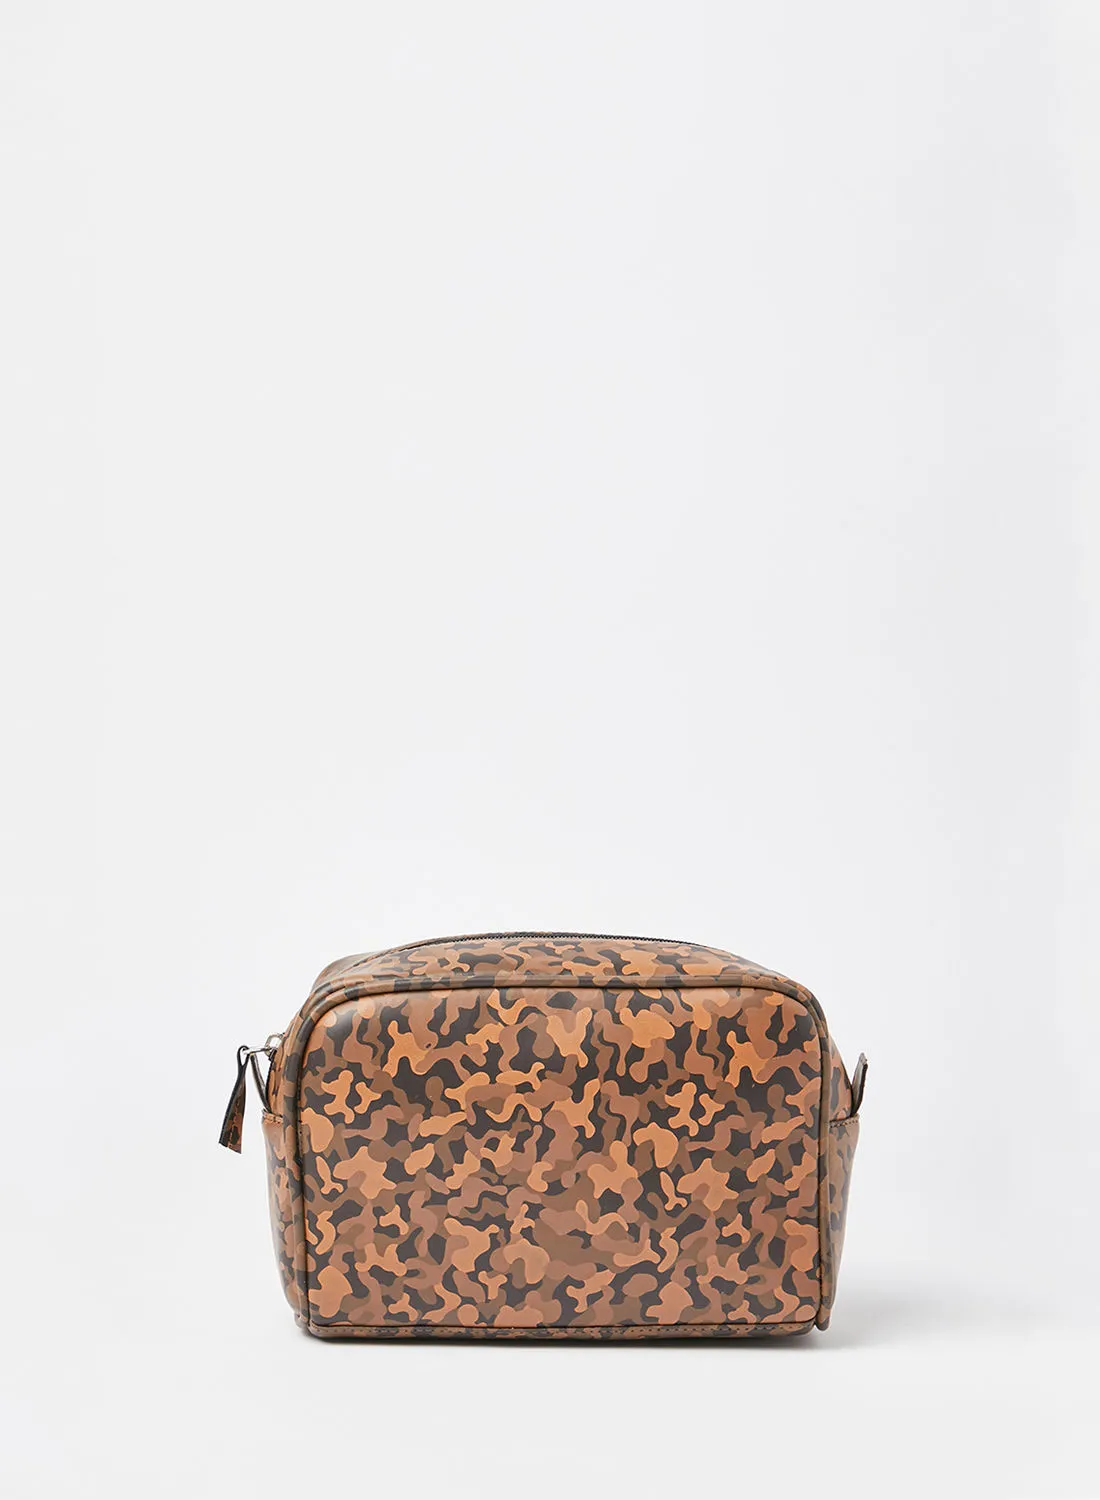 STATE 8 Camouflage Print Toiletry Bag Brown